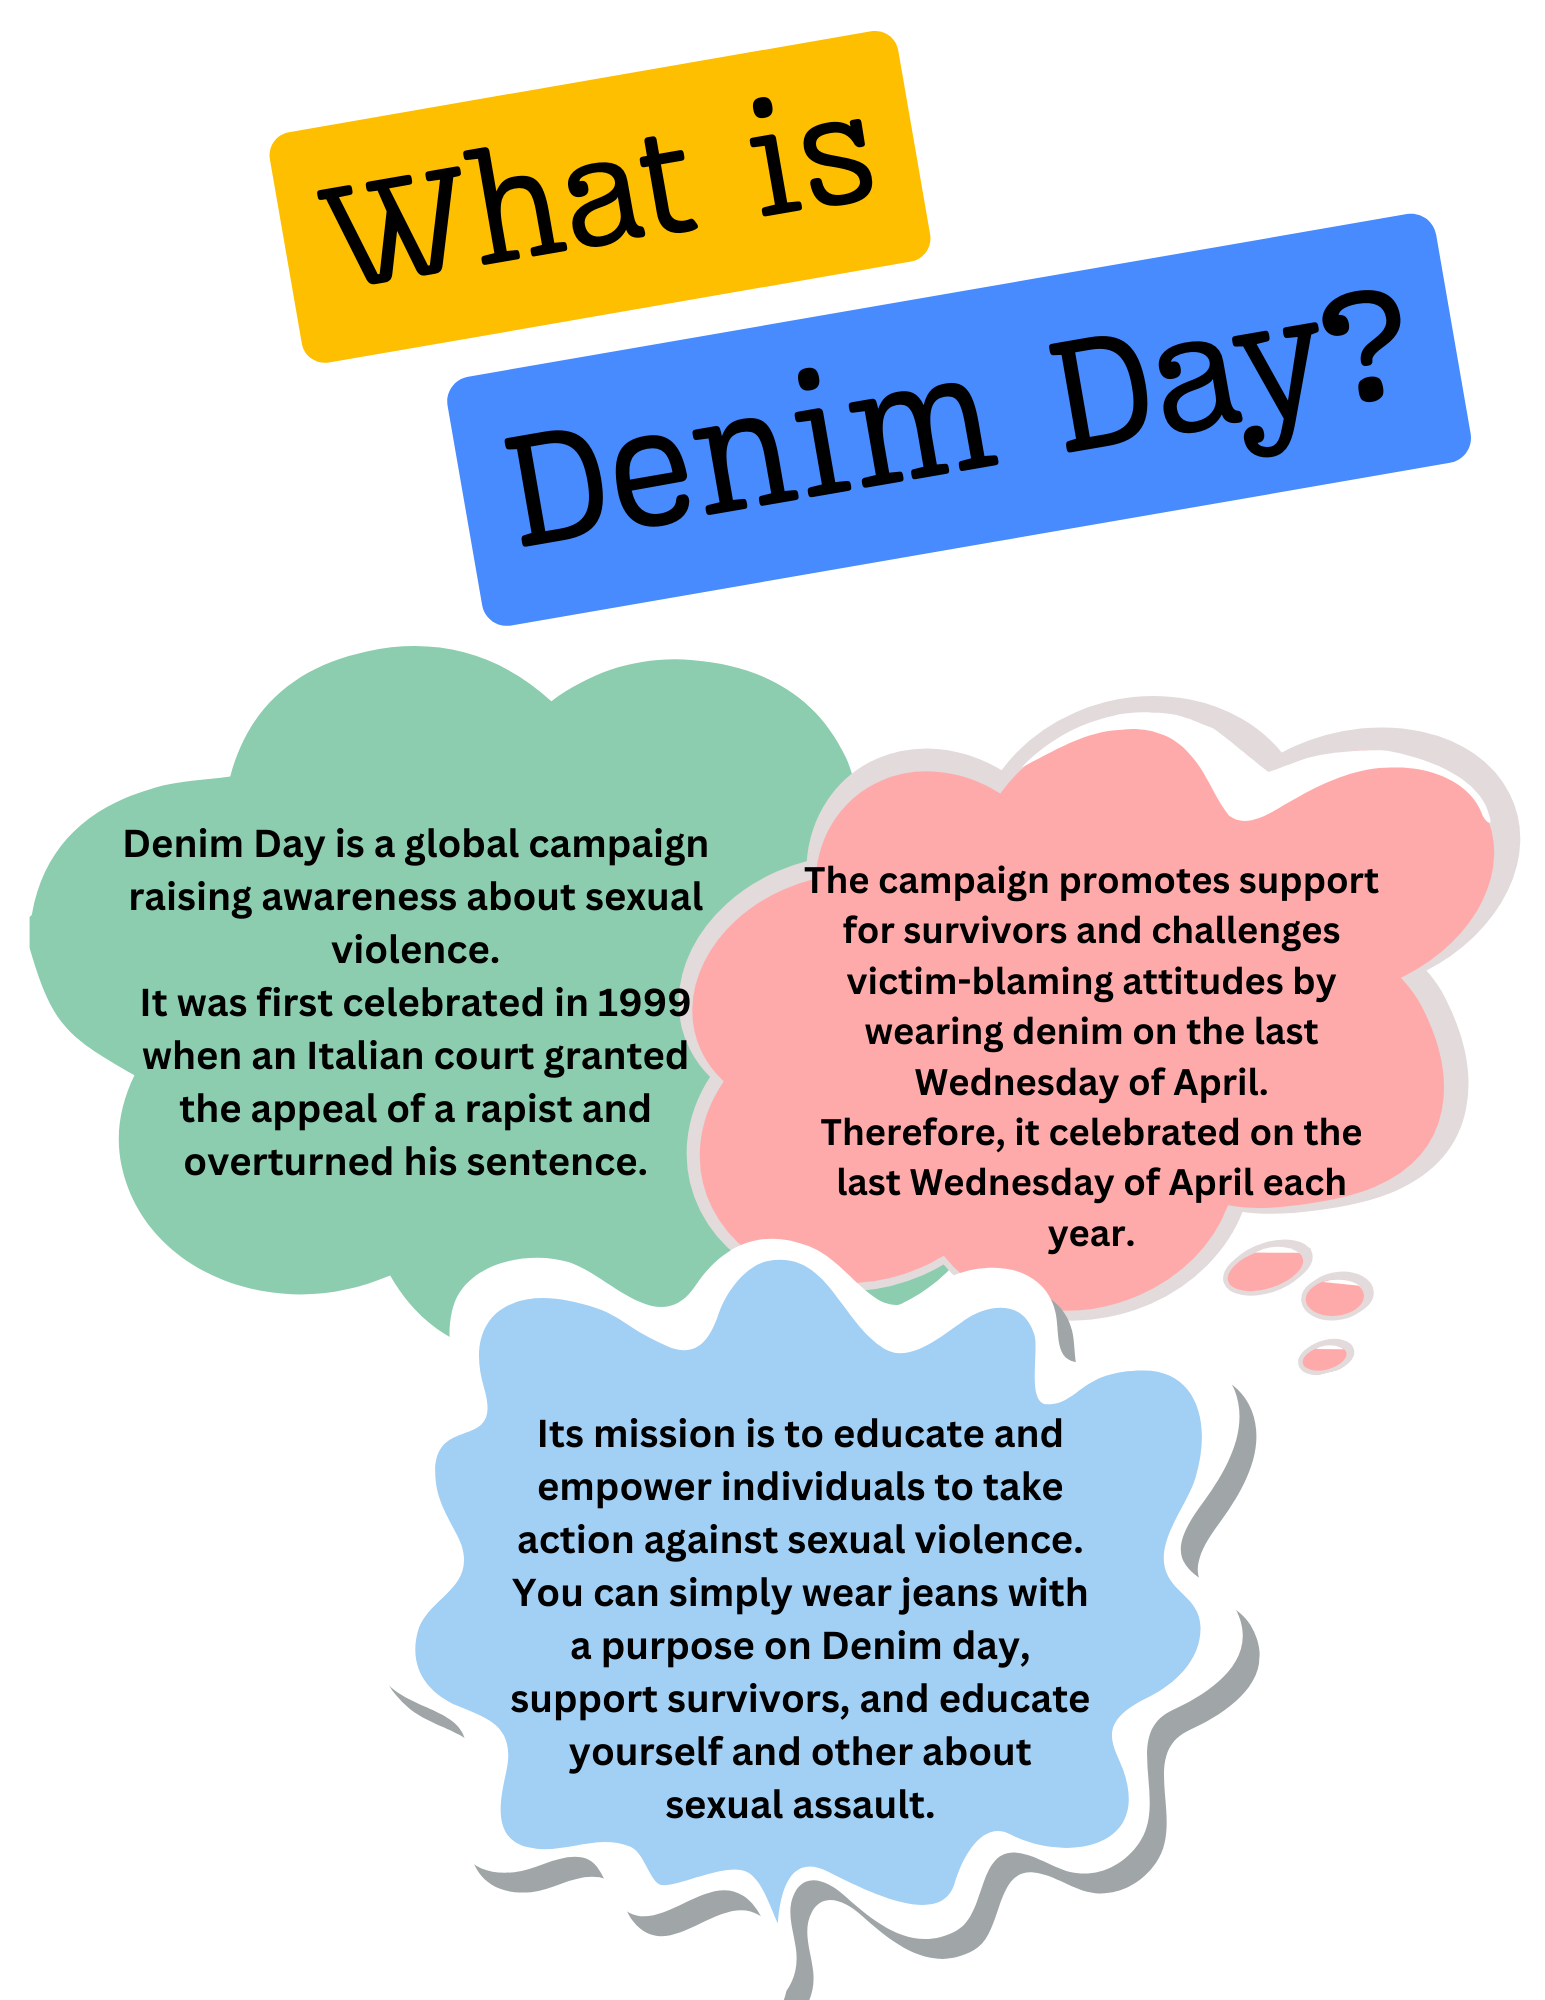 This text explains what Denim Day is about: Denim Day is a global campaign raising awareness about sexual violence.